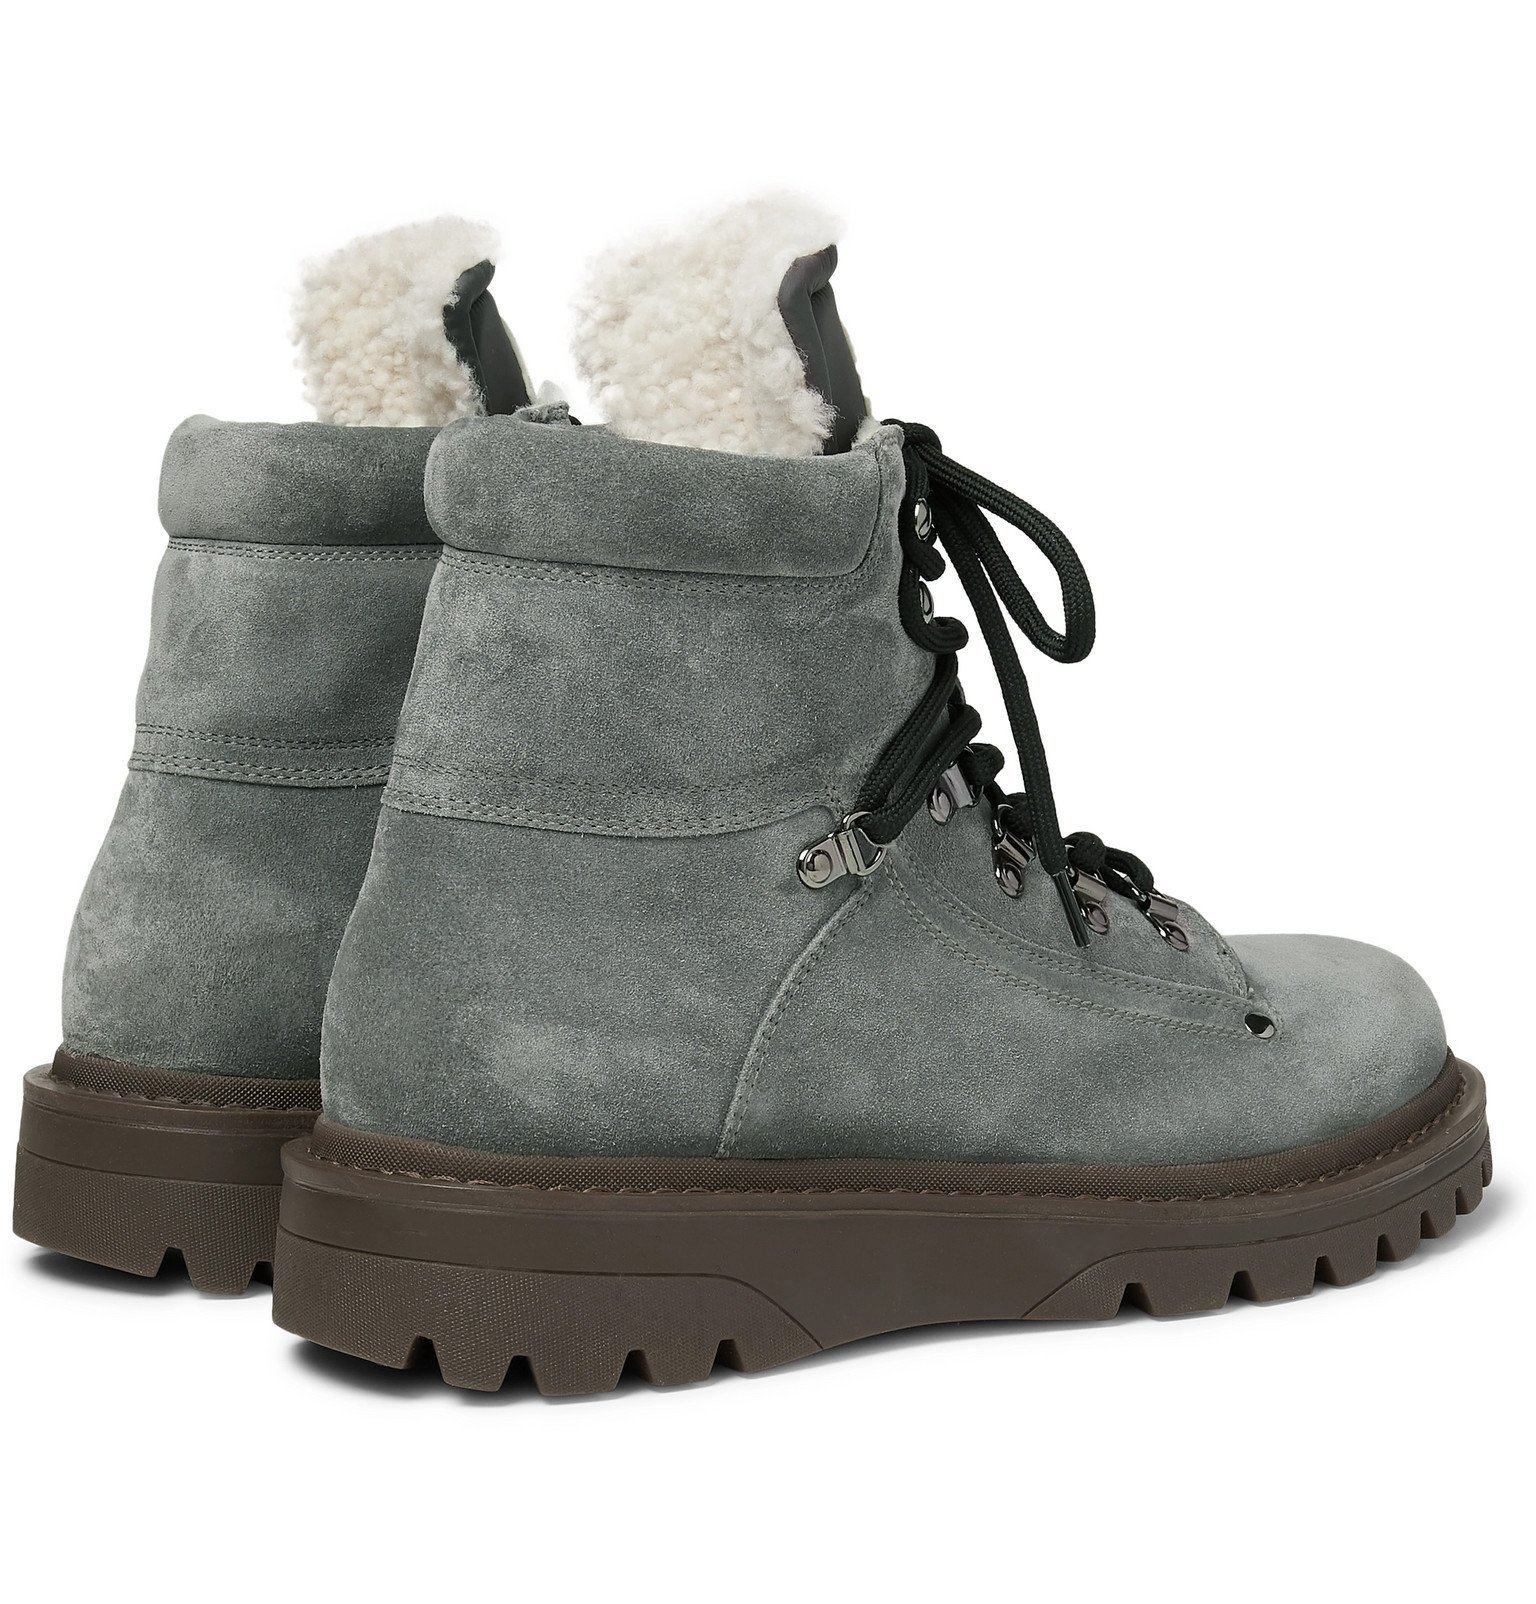 Moncler - Egide Shearling-Lined Suede Boots - Gray Moncler